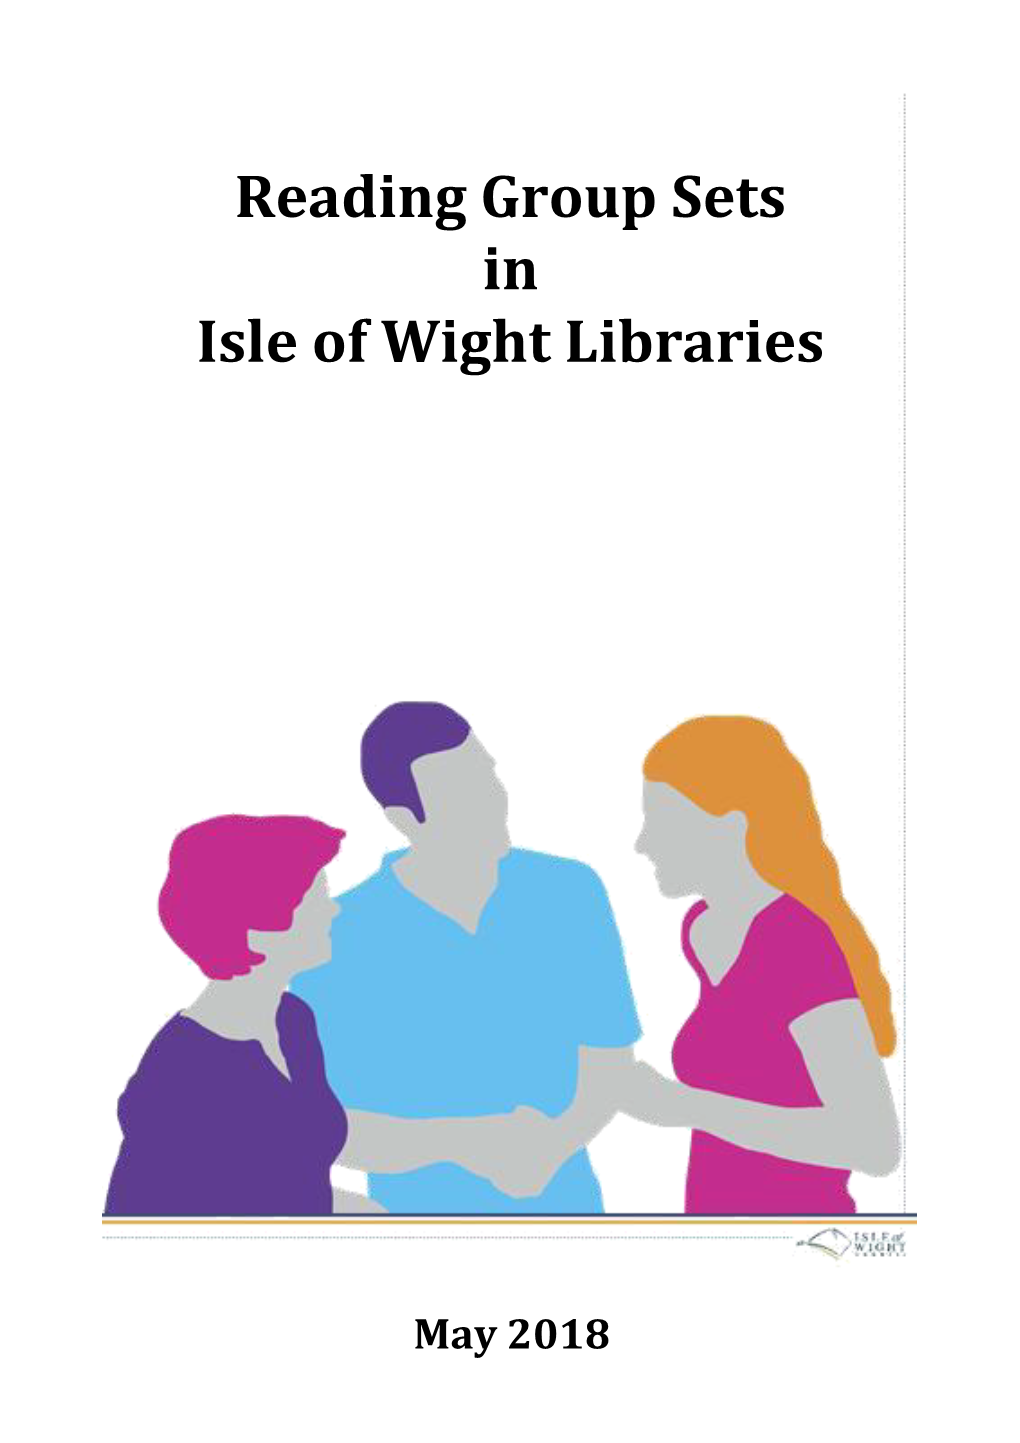 Reading Group Sets in Isle of Wight Libraries